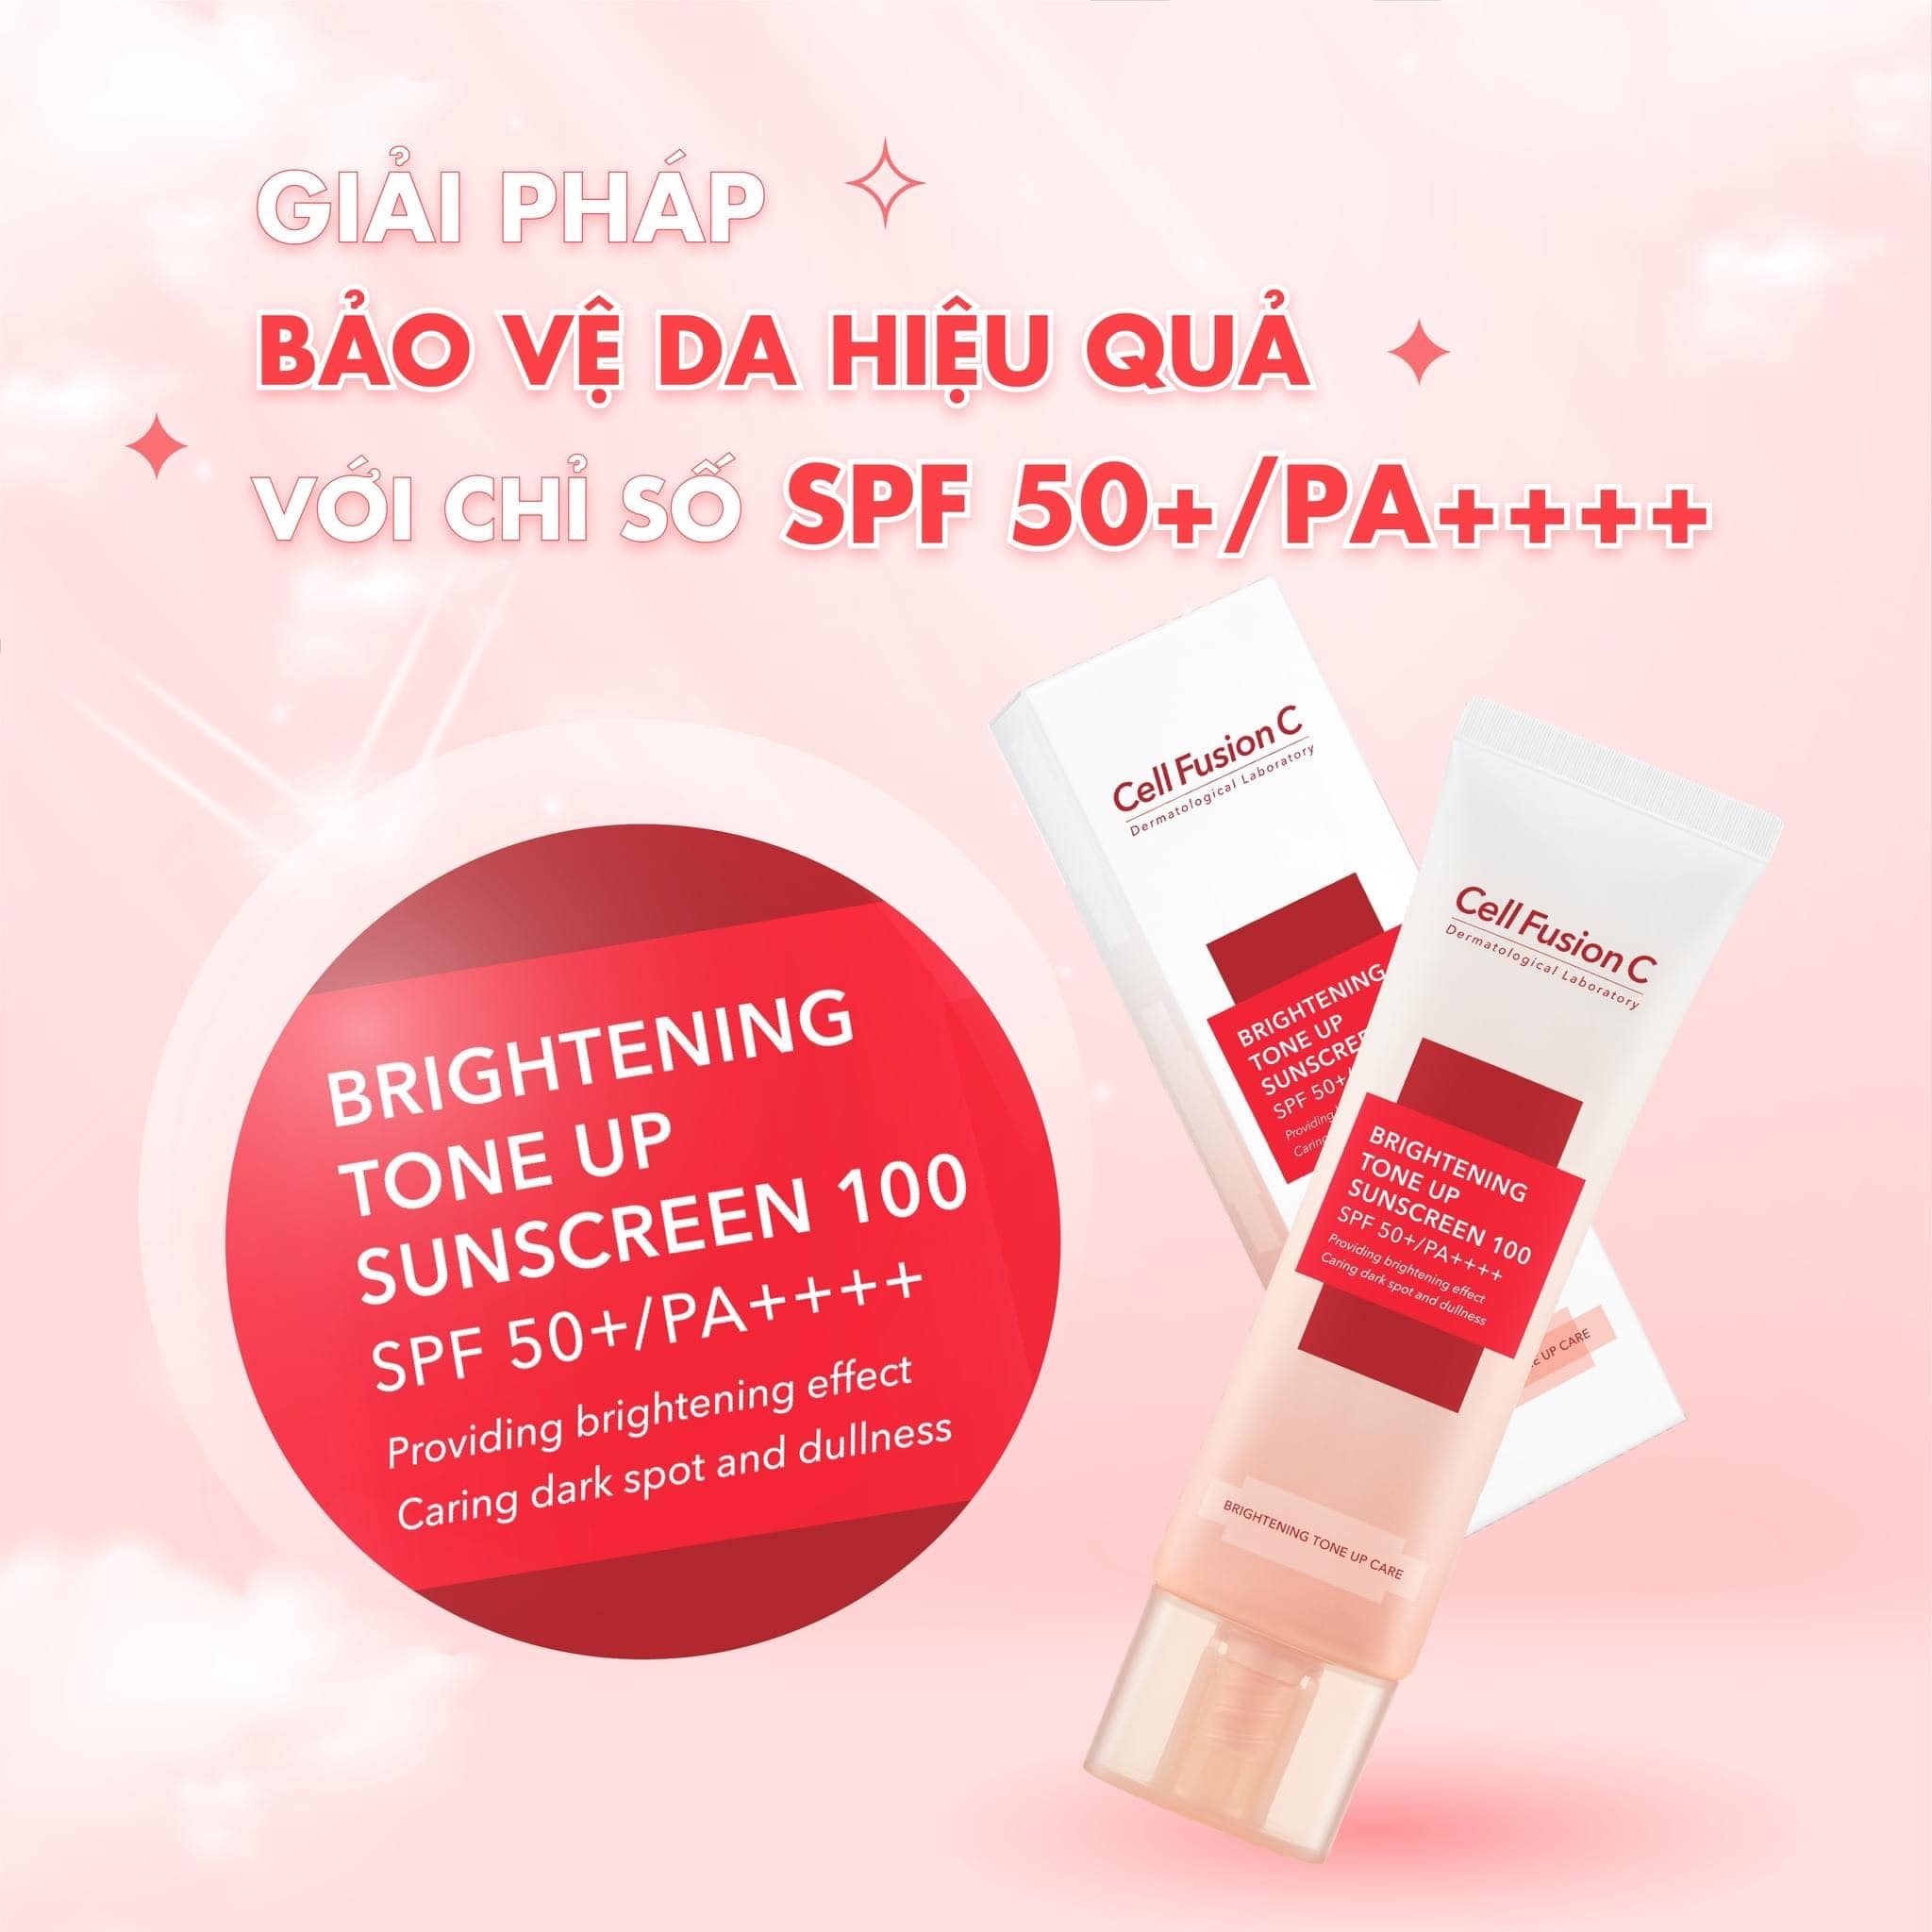 Kem Chống Nắng Cell Fusion C Brightening Tone Up Sunscreen 100 SPF50+